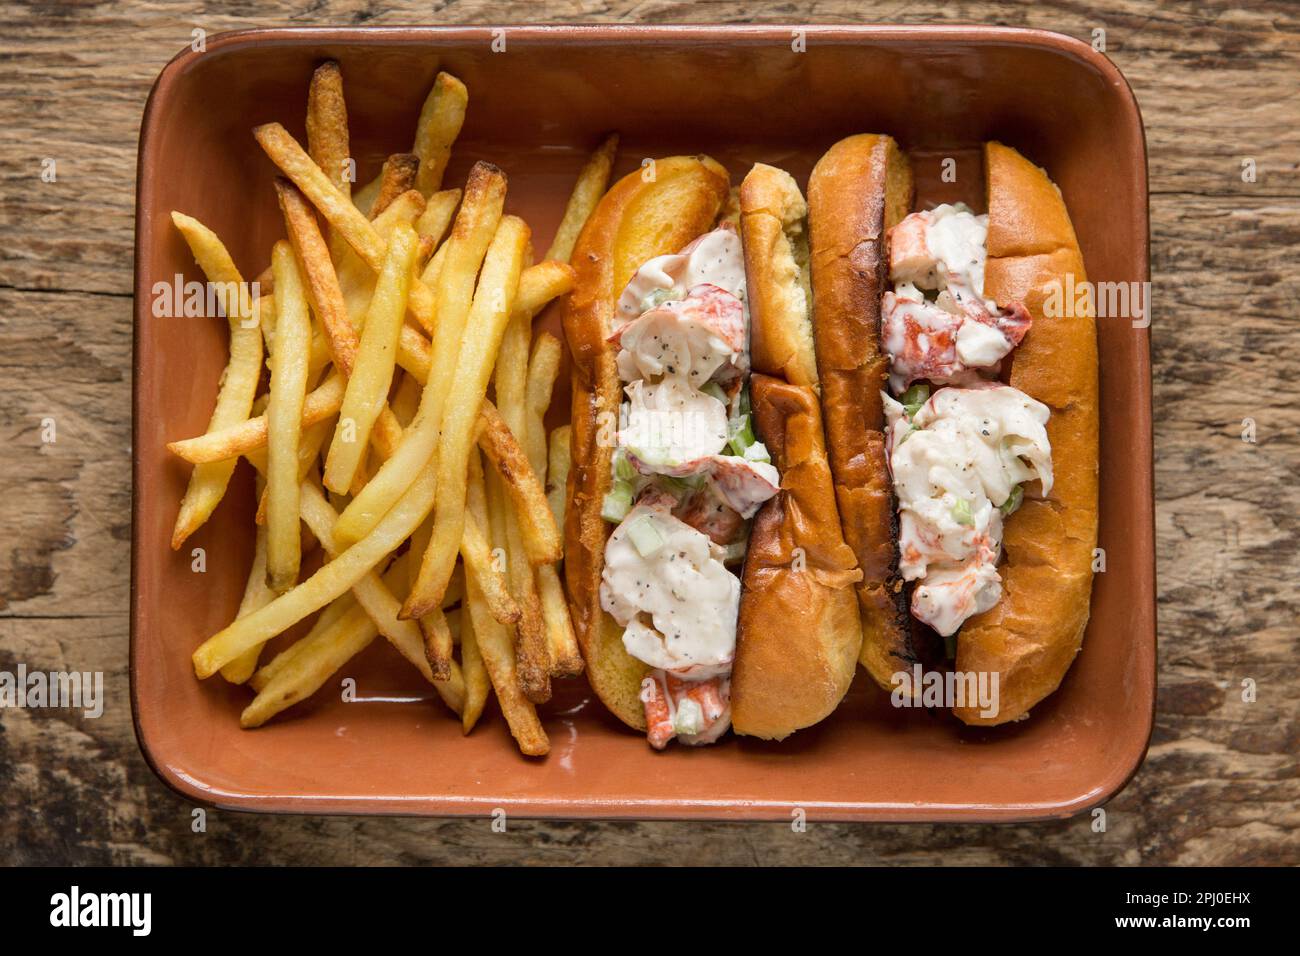 Lobster brioche rolls made with a boiled lobster, Homarus gammarus, caught in the English Channel. The lobster is combined with mayonnaise, diced cele Stock Photo